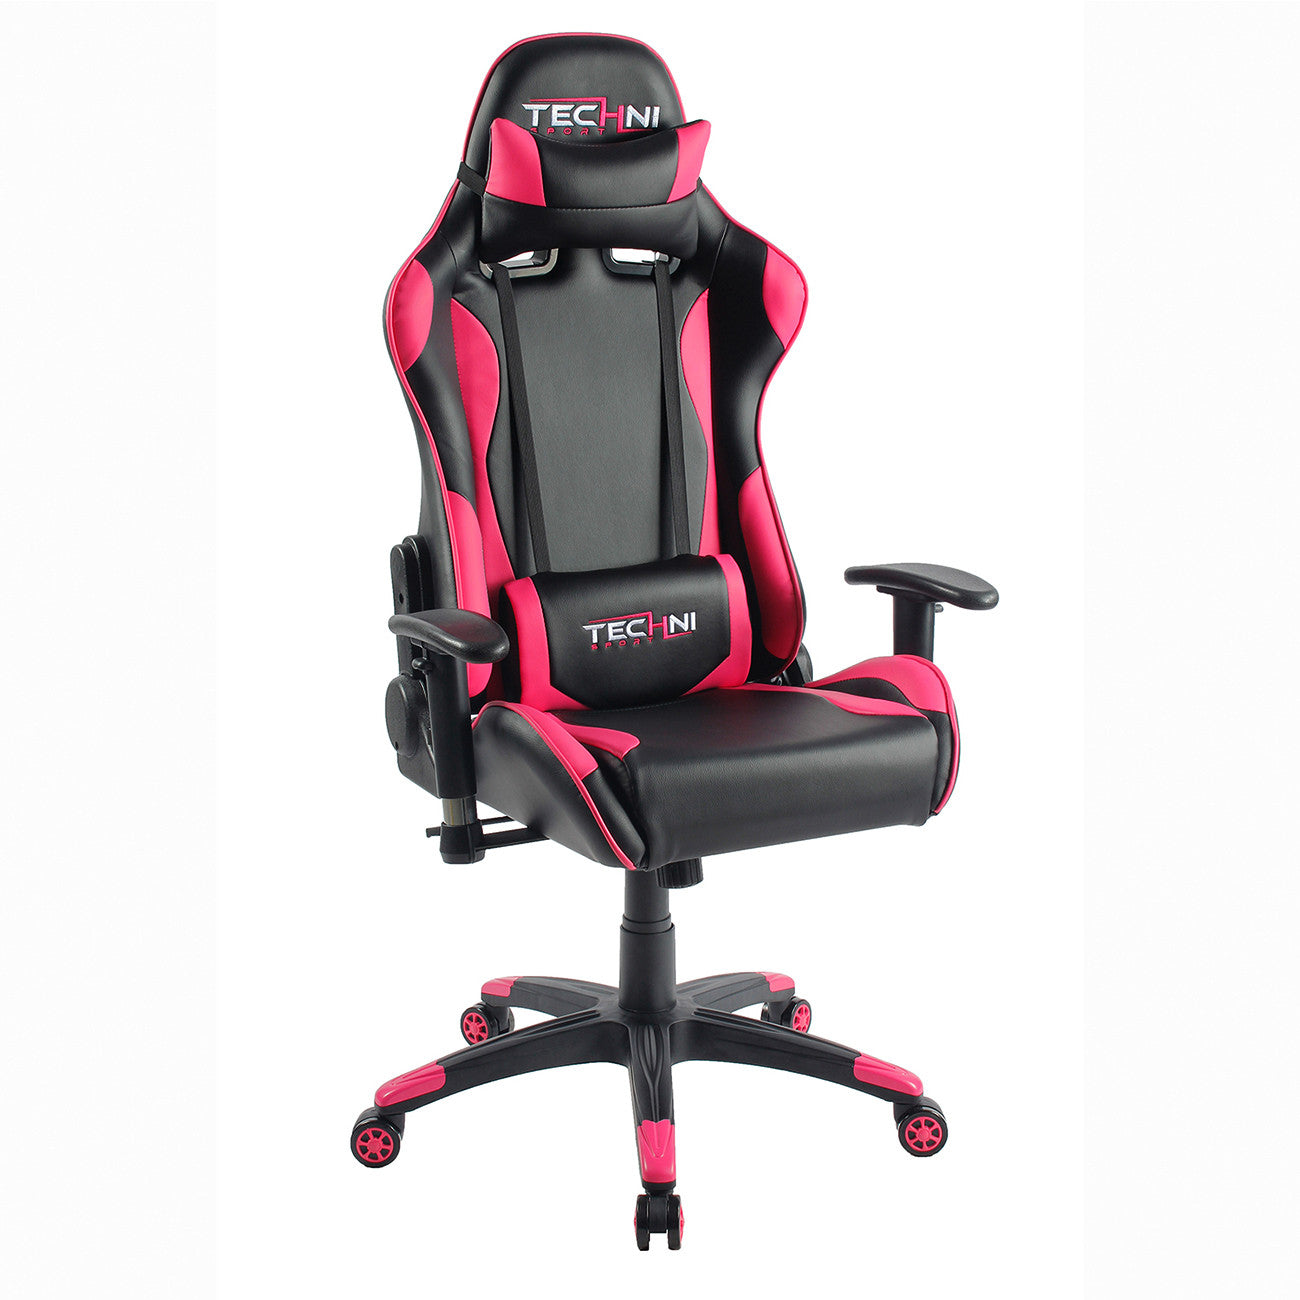 Techni Sport Rta-ts45-pnk Office-pc Gaming Chair. Color: Pink